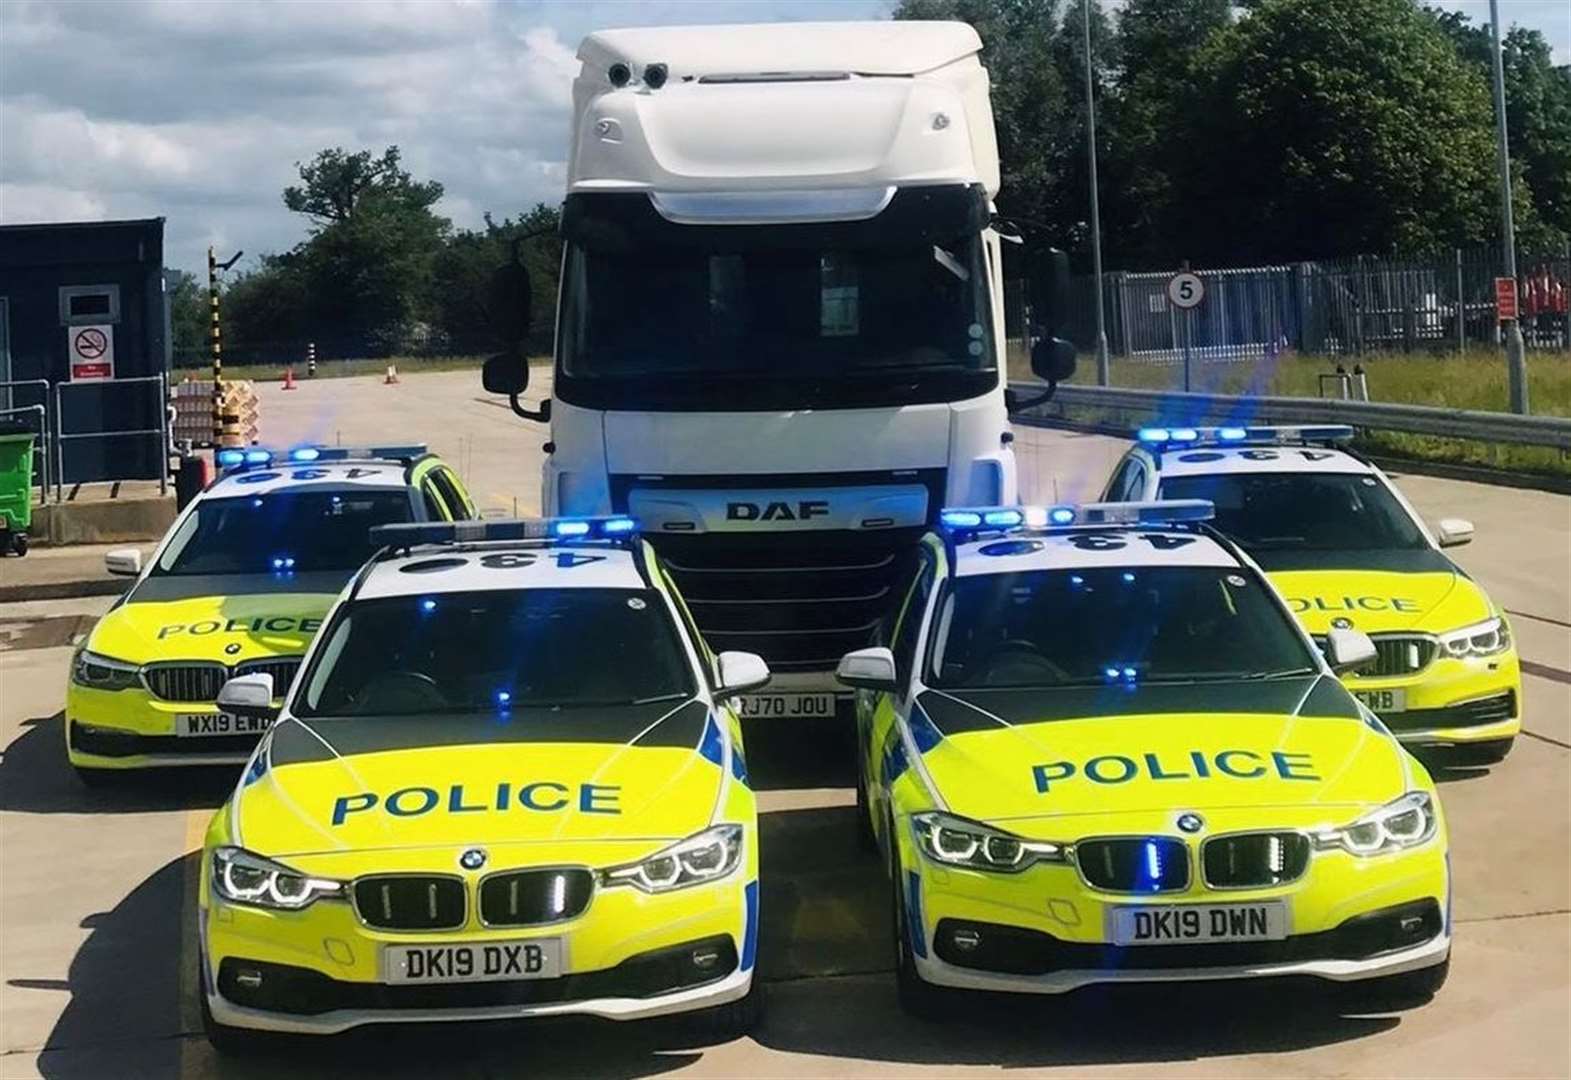 Undercover police in lorries to catch unsafe M25 drivers